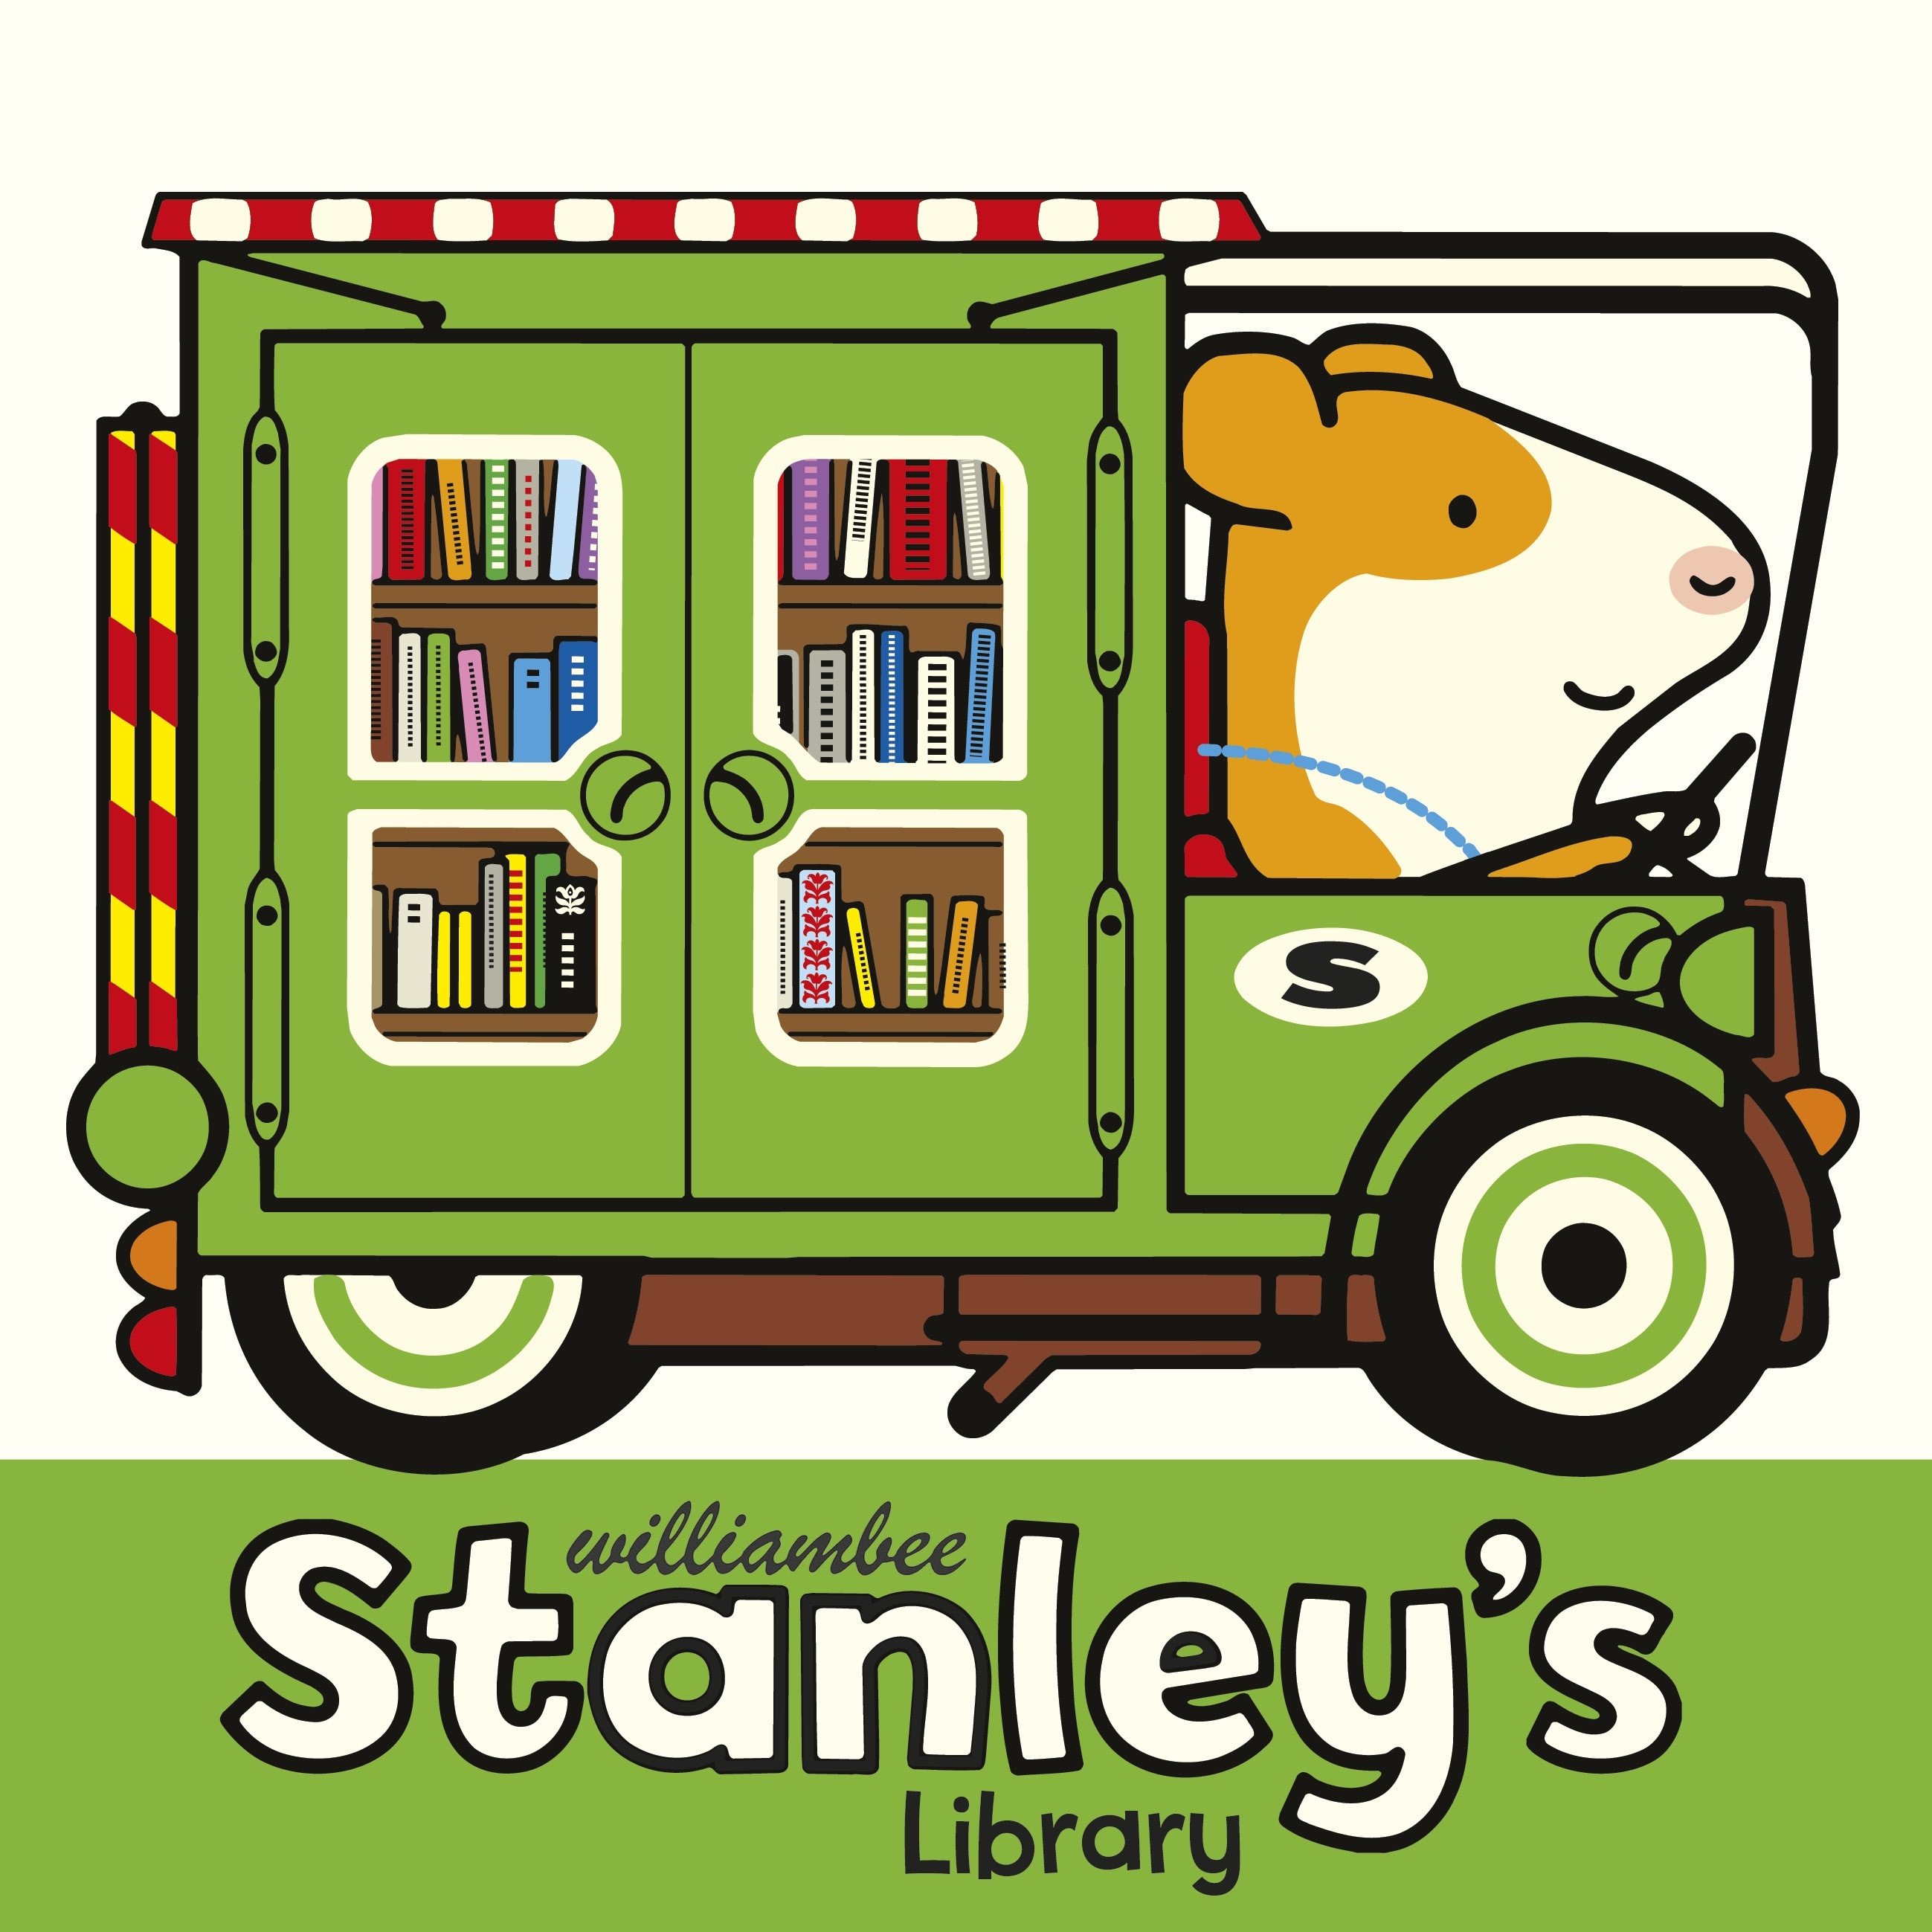 Book “Stanley's Library” by William Bee — September 9, 2021